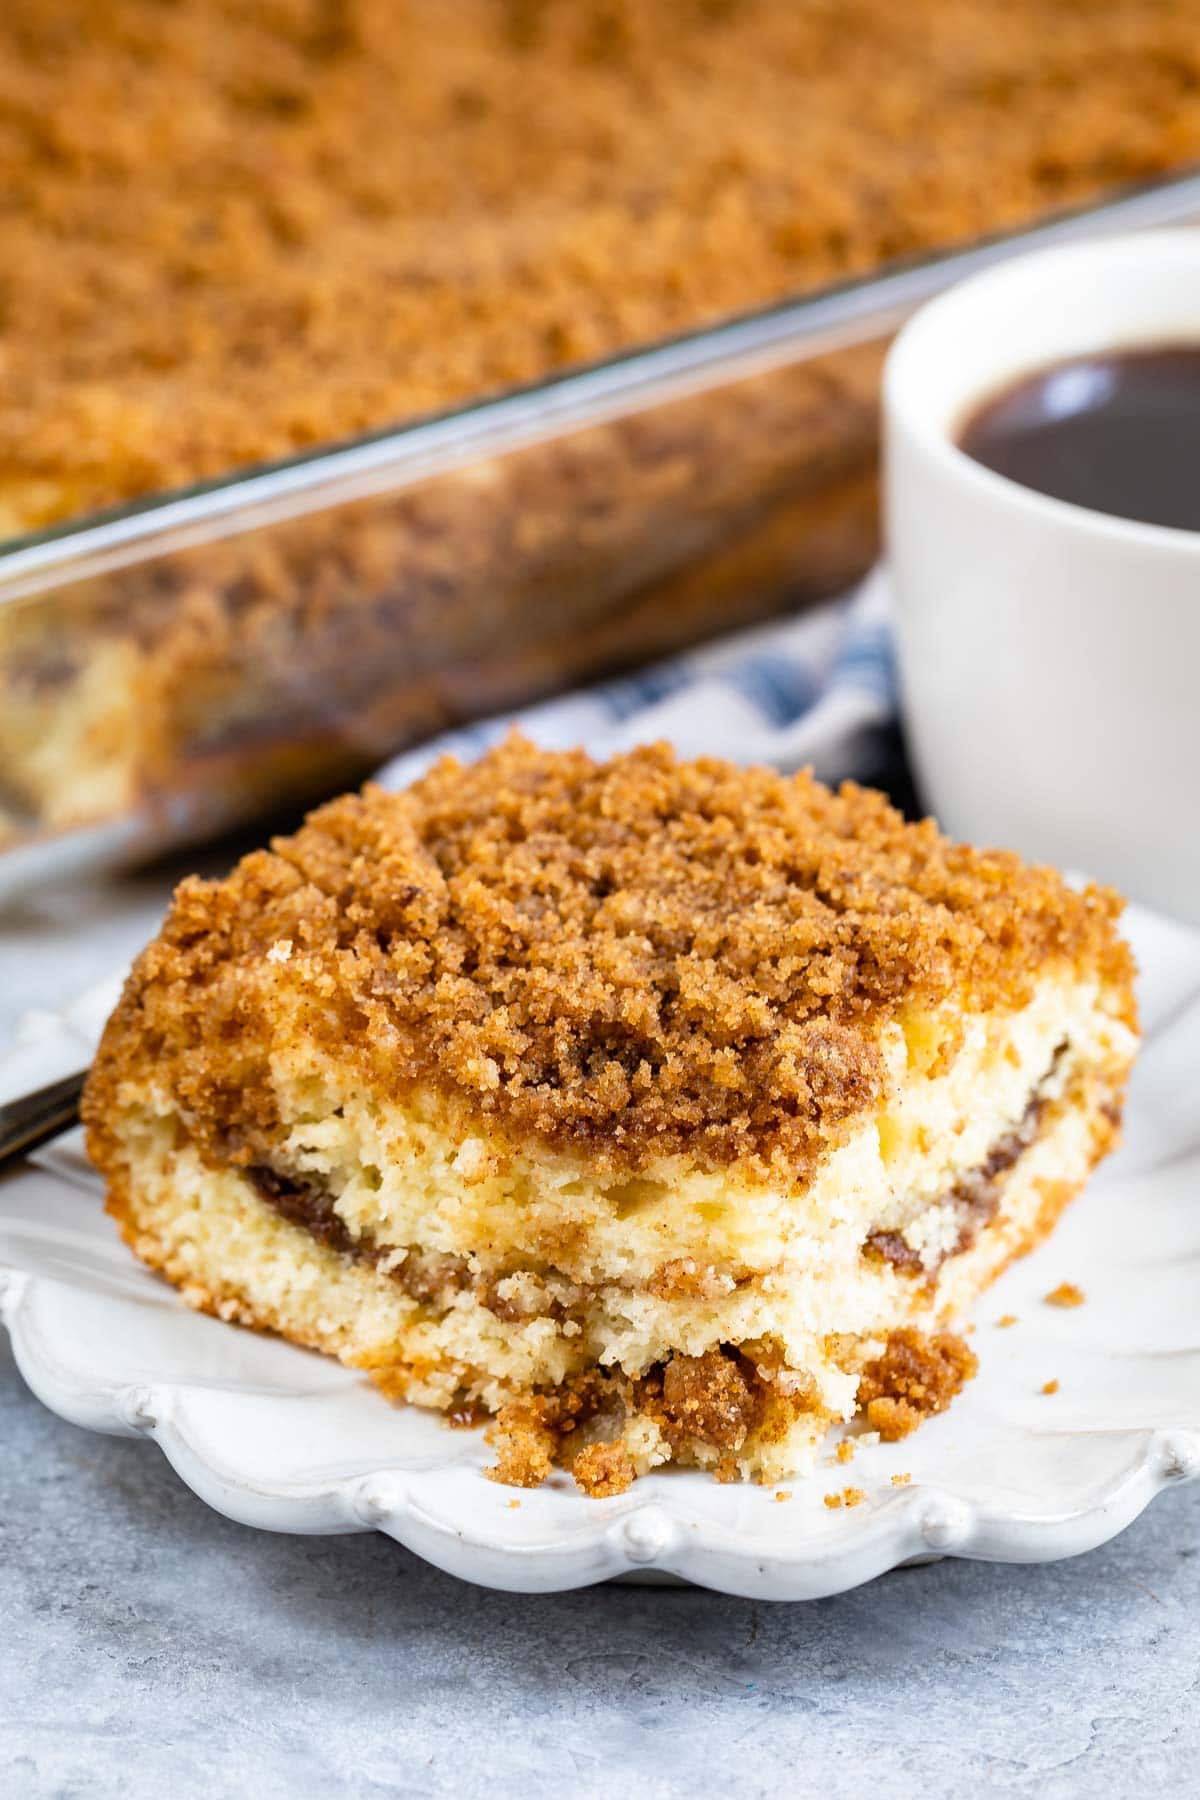 One piece of streusel coffee cake on a plate